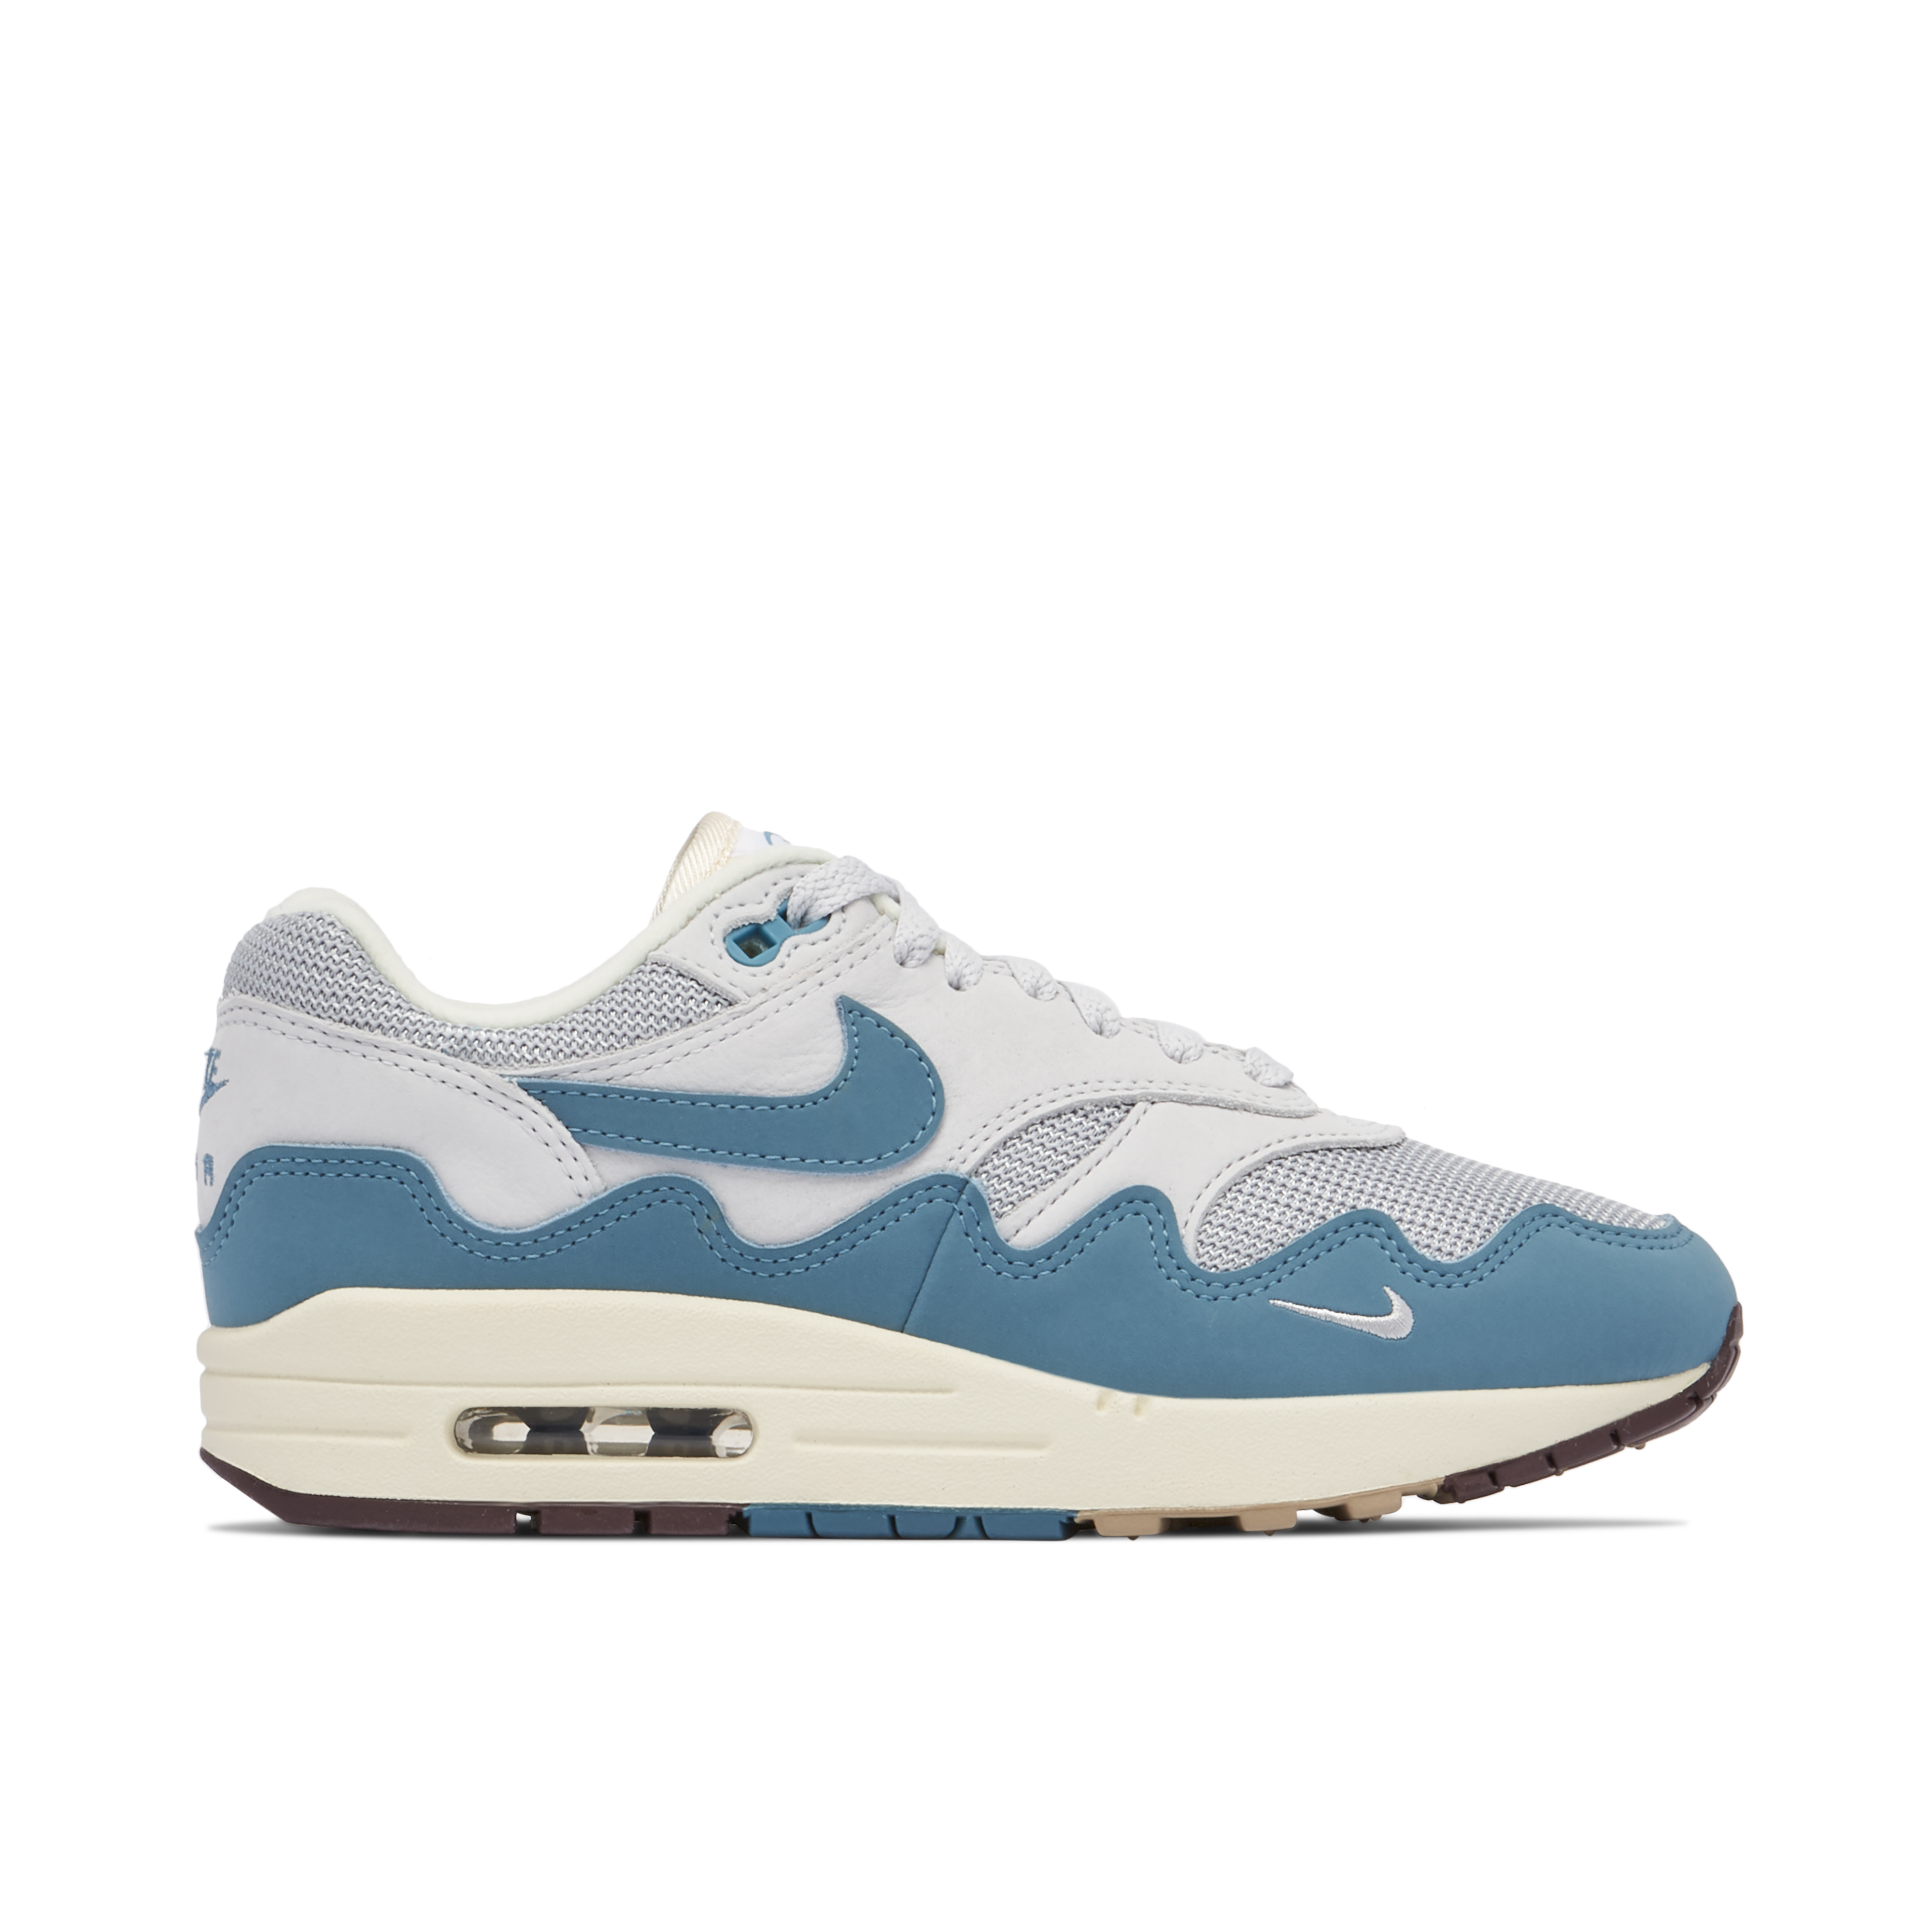 Nike Air Max 1 x Patta Monarch (Without Bracelet) | DH1348-001 | Laced